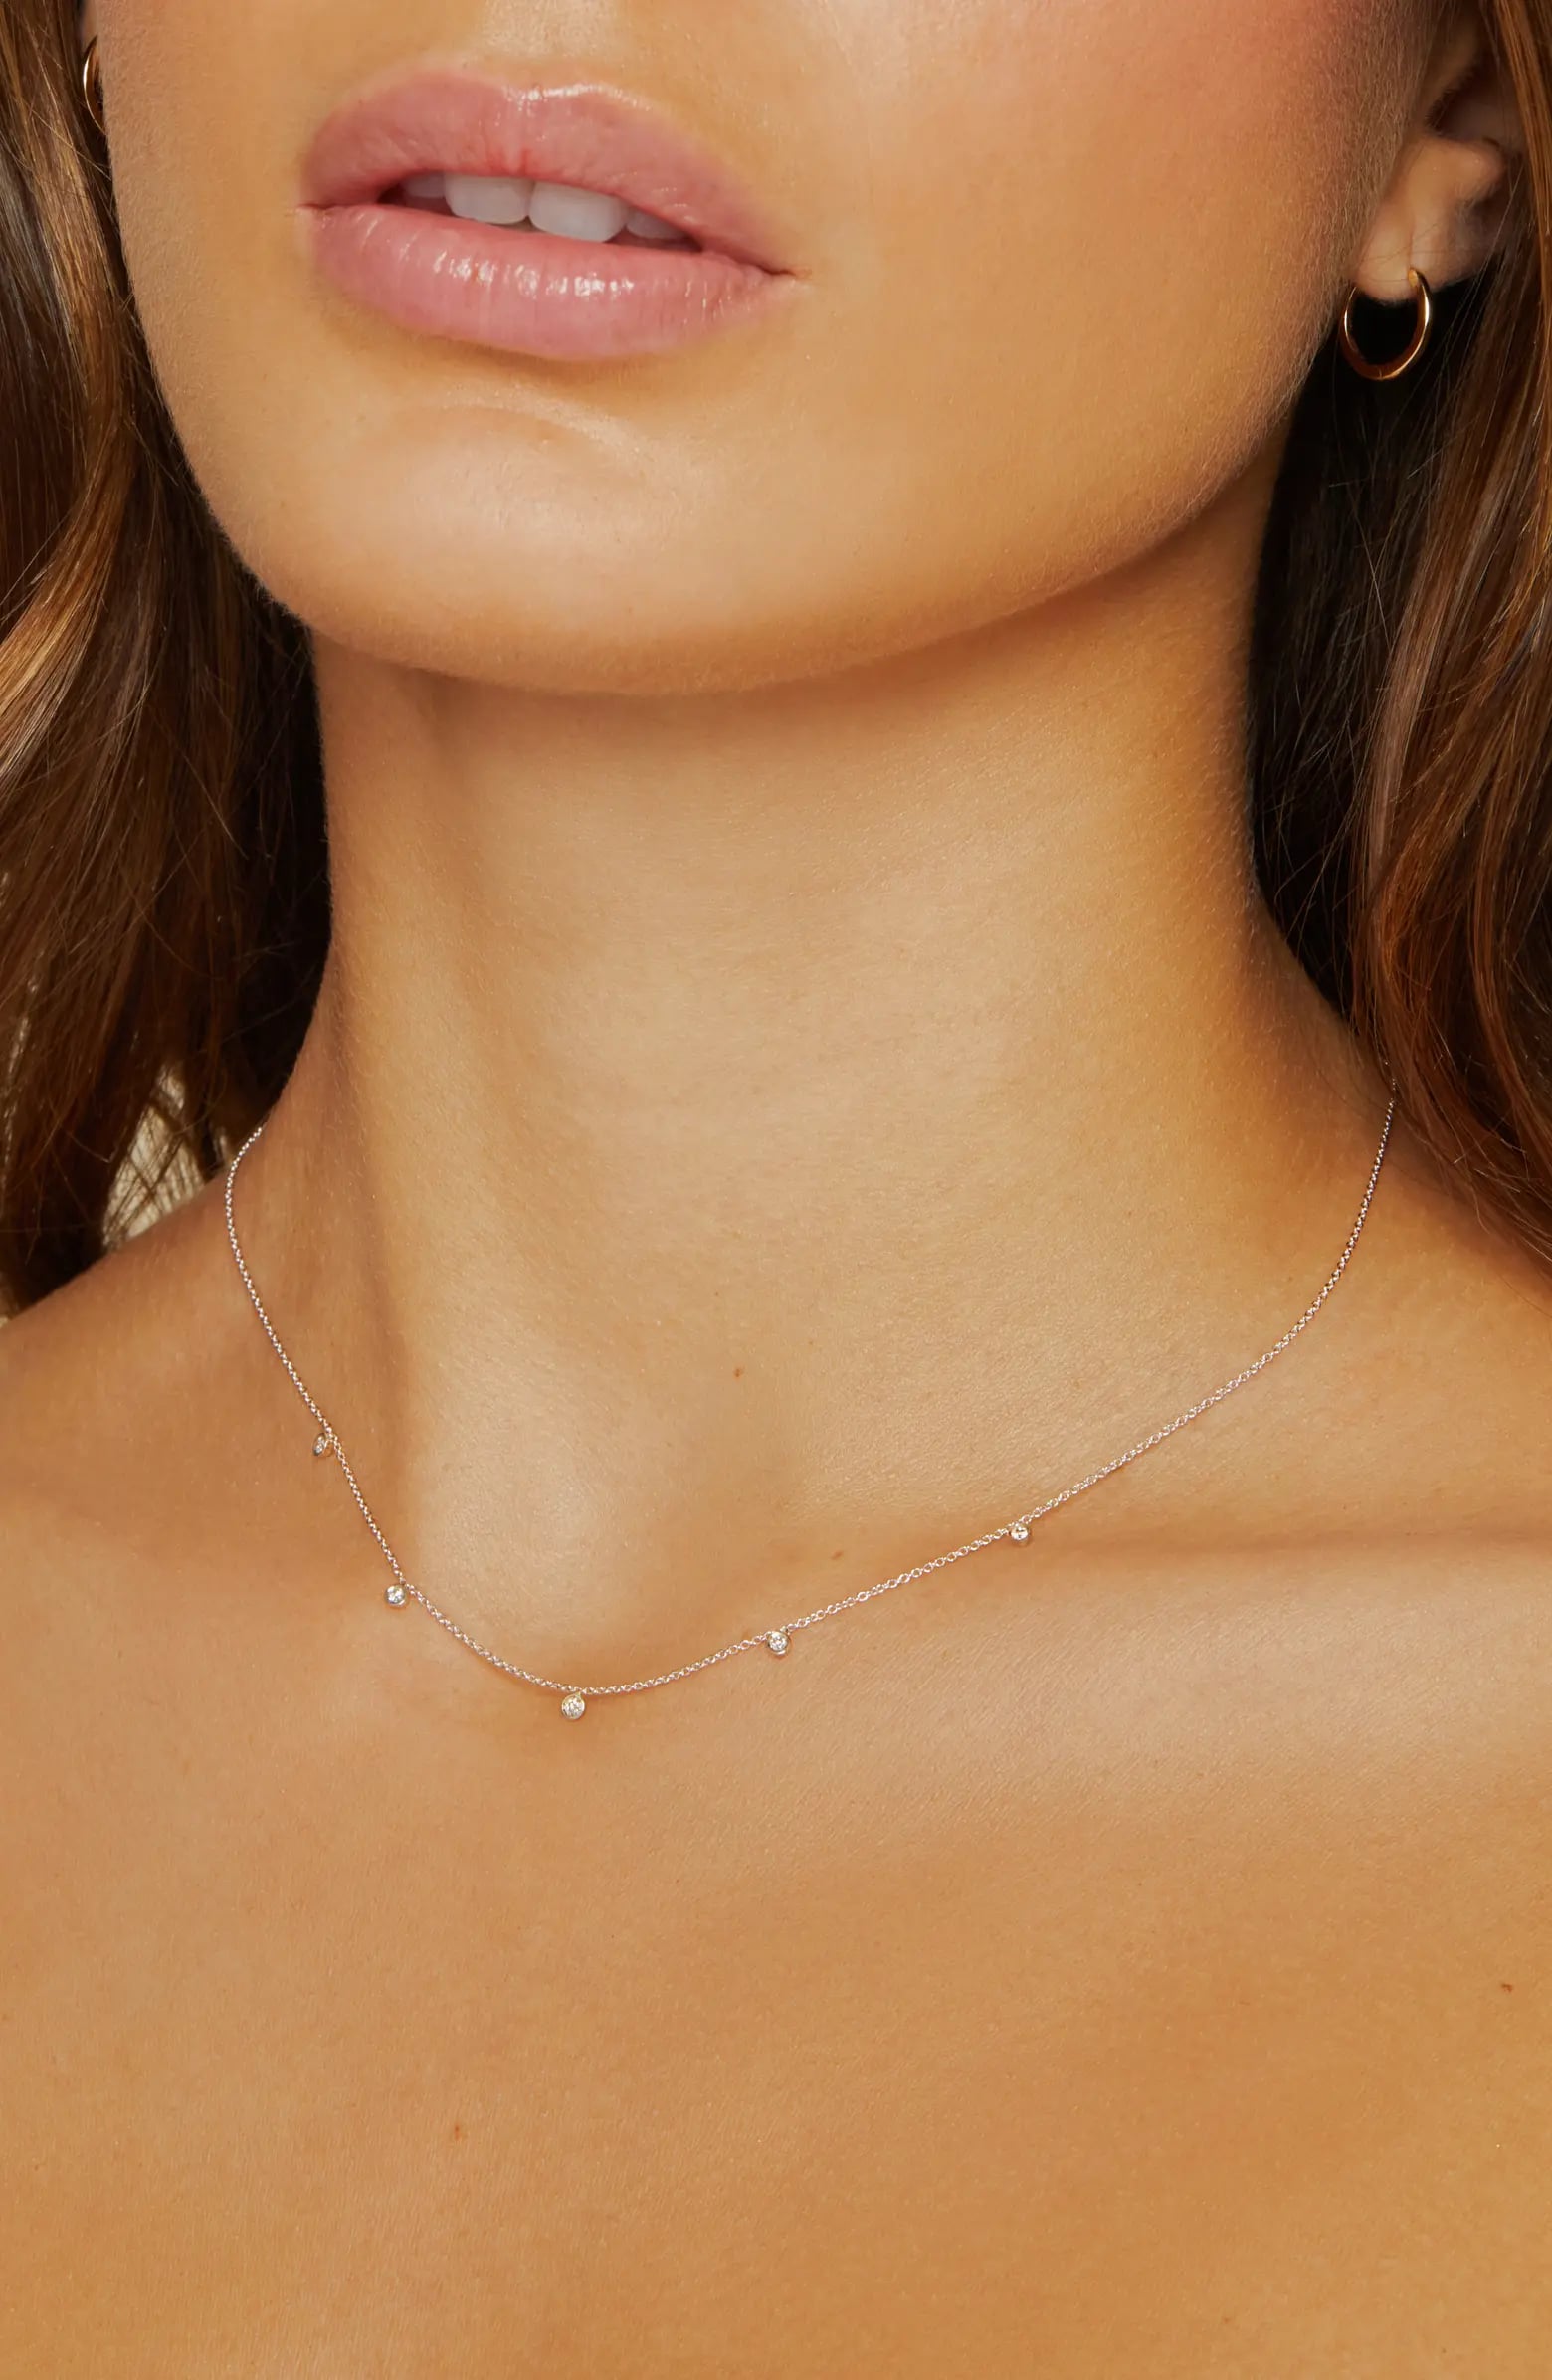 Expensive Real Diamond Choker Necklace